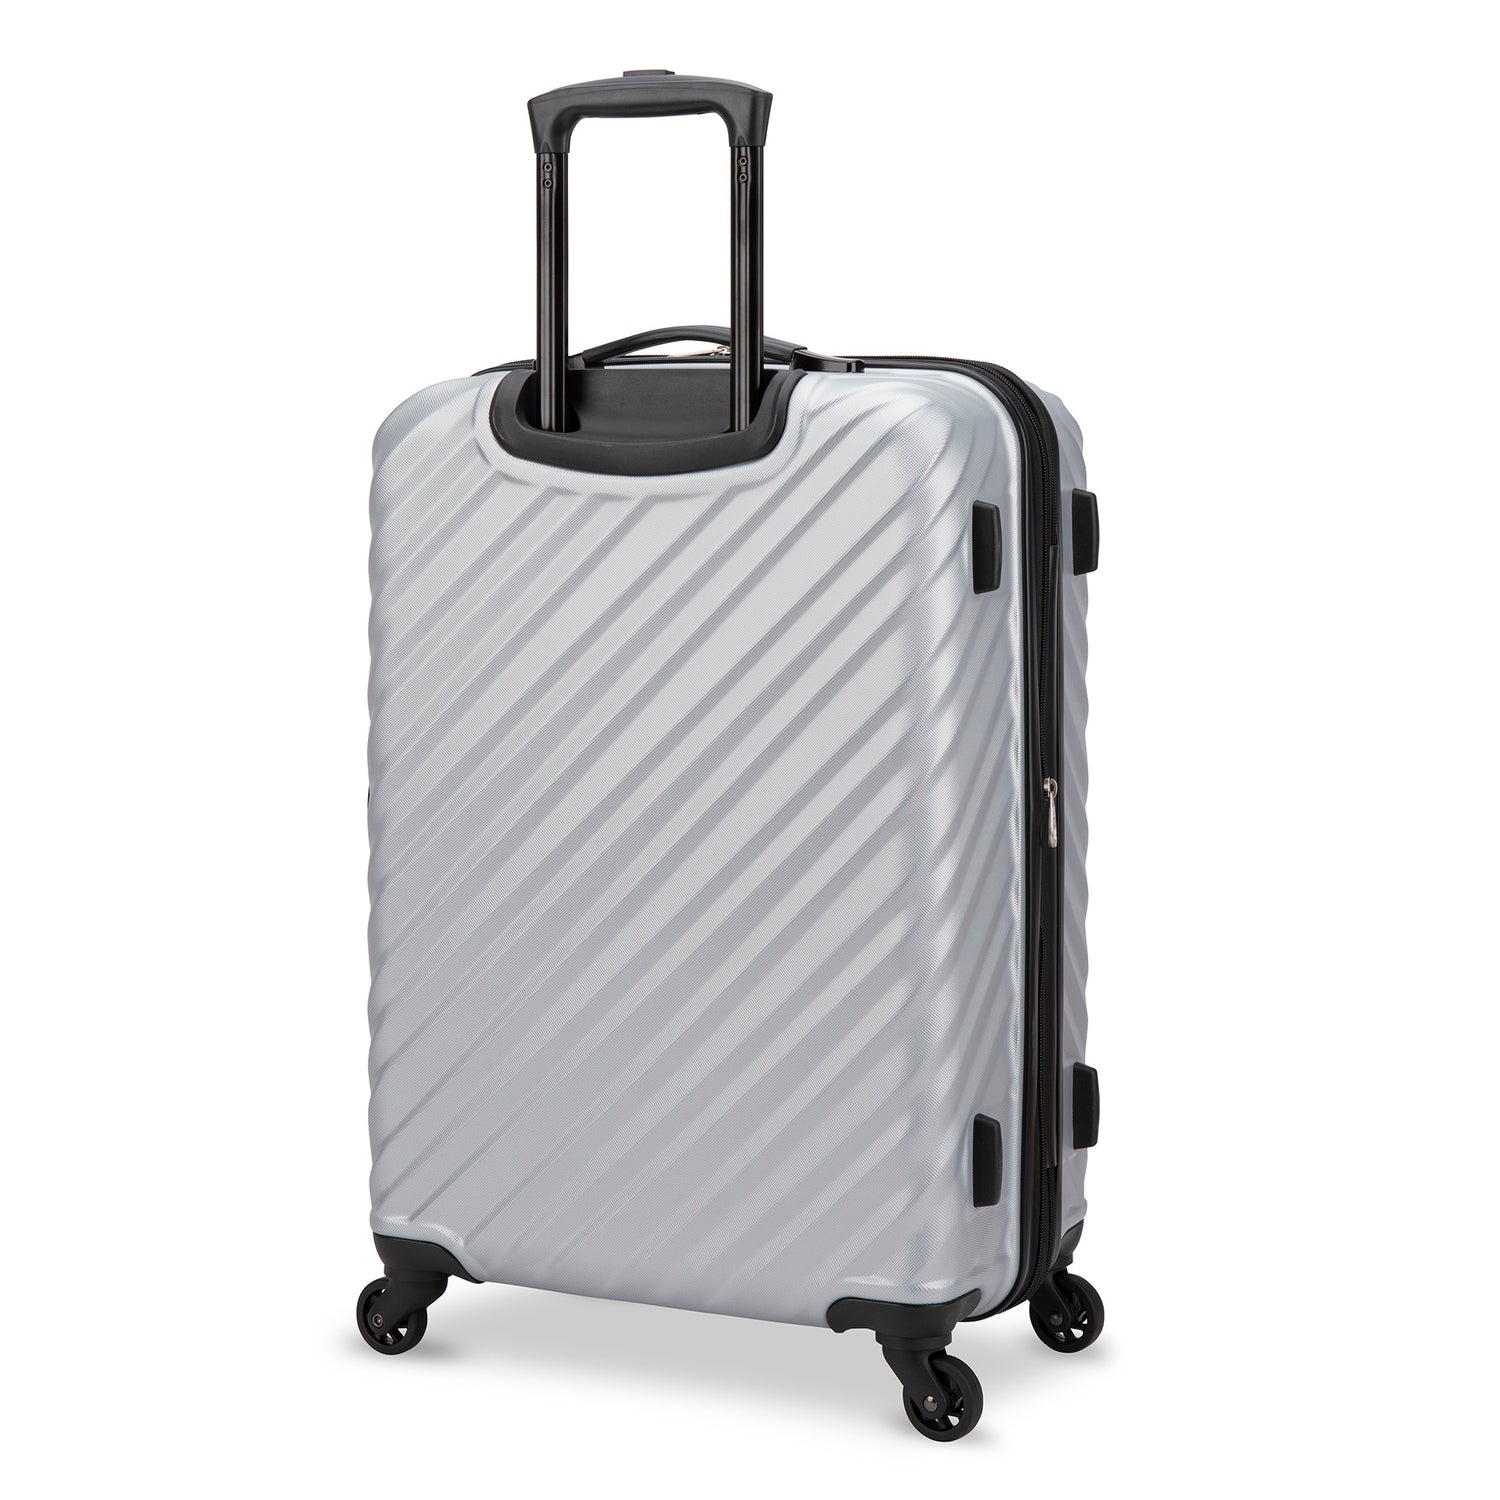 Back side view of a silver hard side luggage called MOD designed by Swiss Gear sold at Bentley, showcasing its telescopic handle and resistant-absorbant texture.